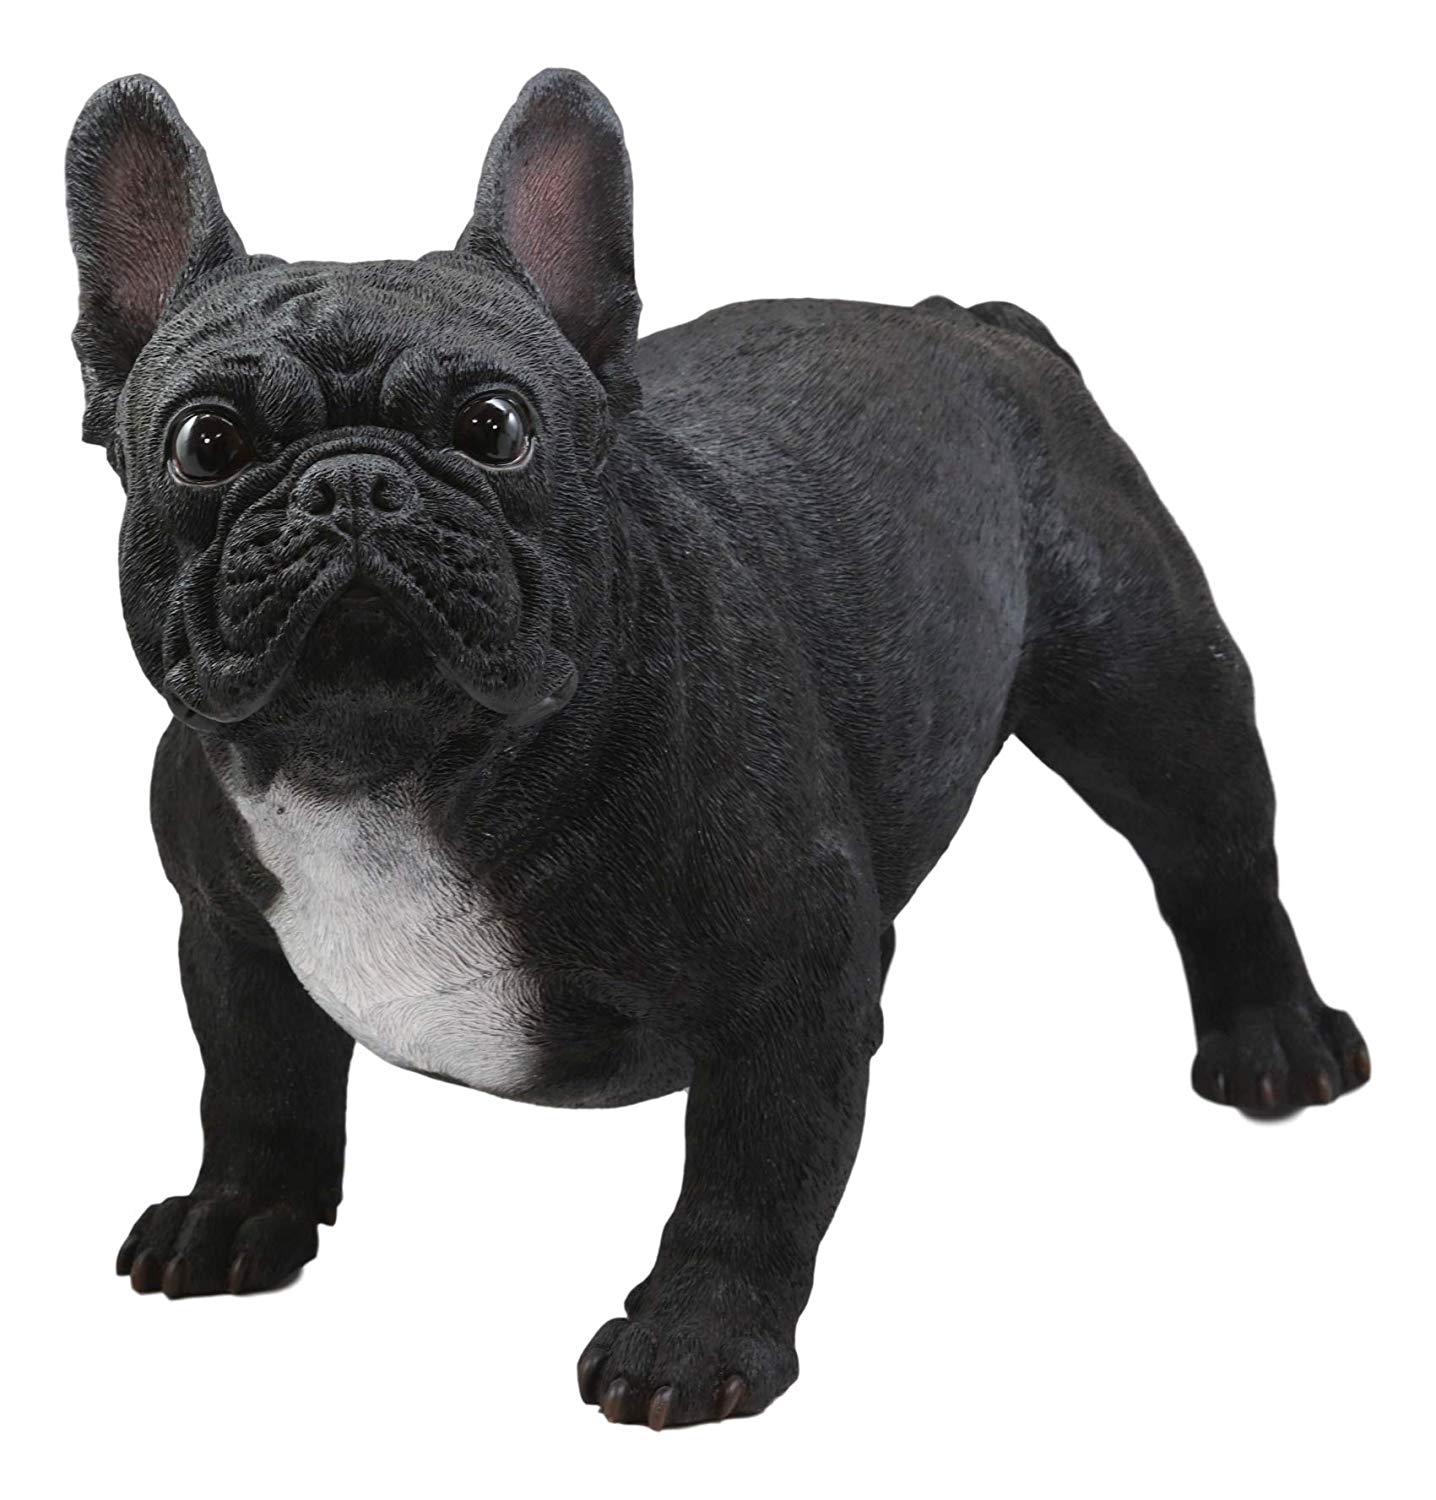 Ebros Adorable Large Lifelike Realistic Black French Bulldog Statue with Glass Eyes 19.5" Long Frenchie Figurine Pedigree Breed Animal Theme Dogs Puppy Puppies Sculpture - image 1 of 4